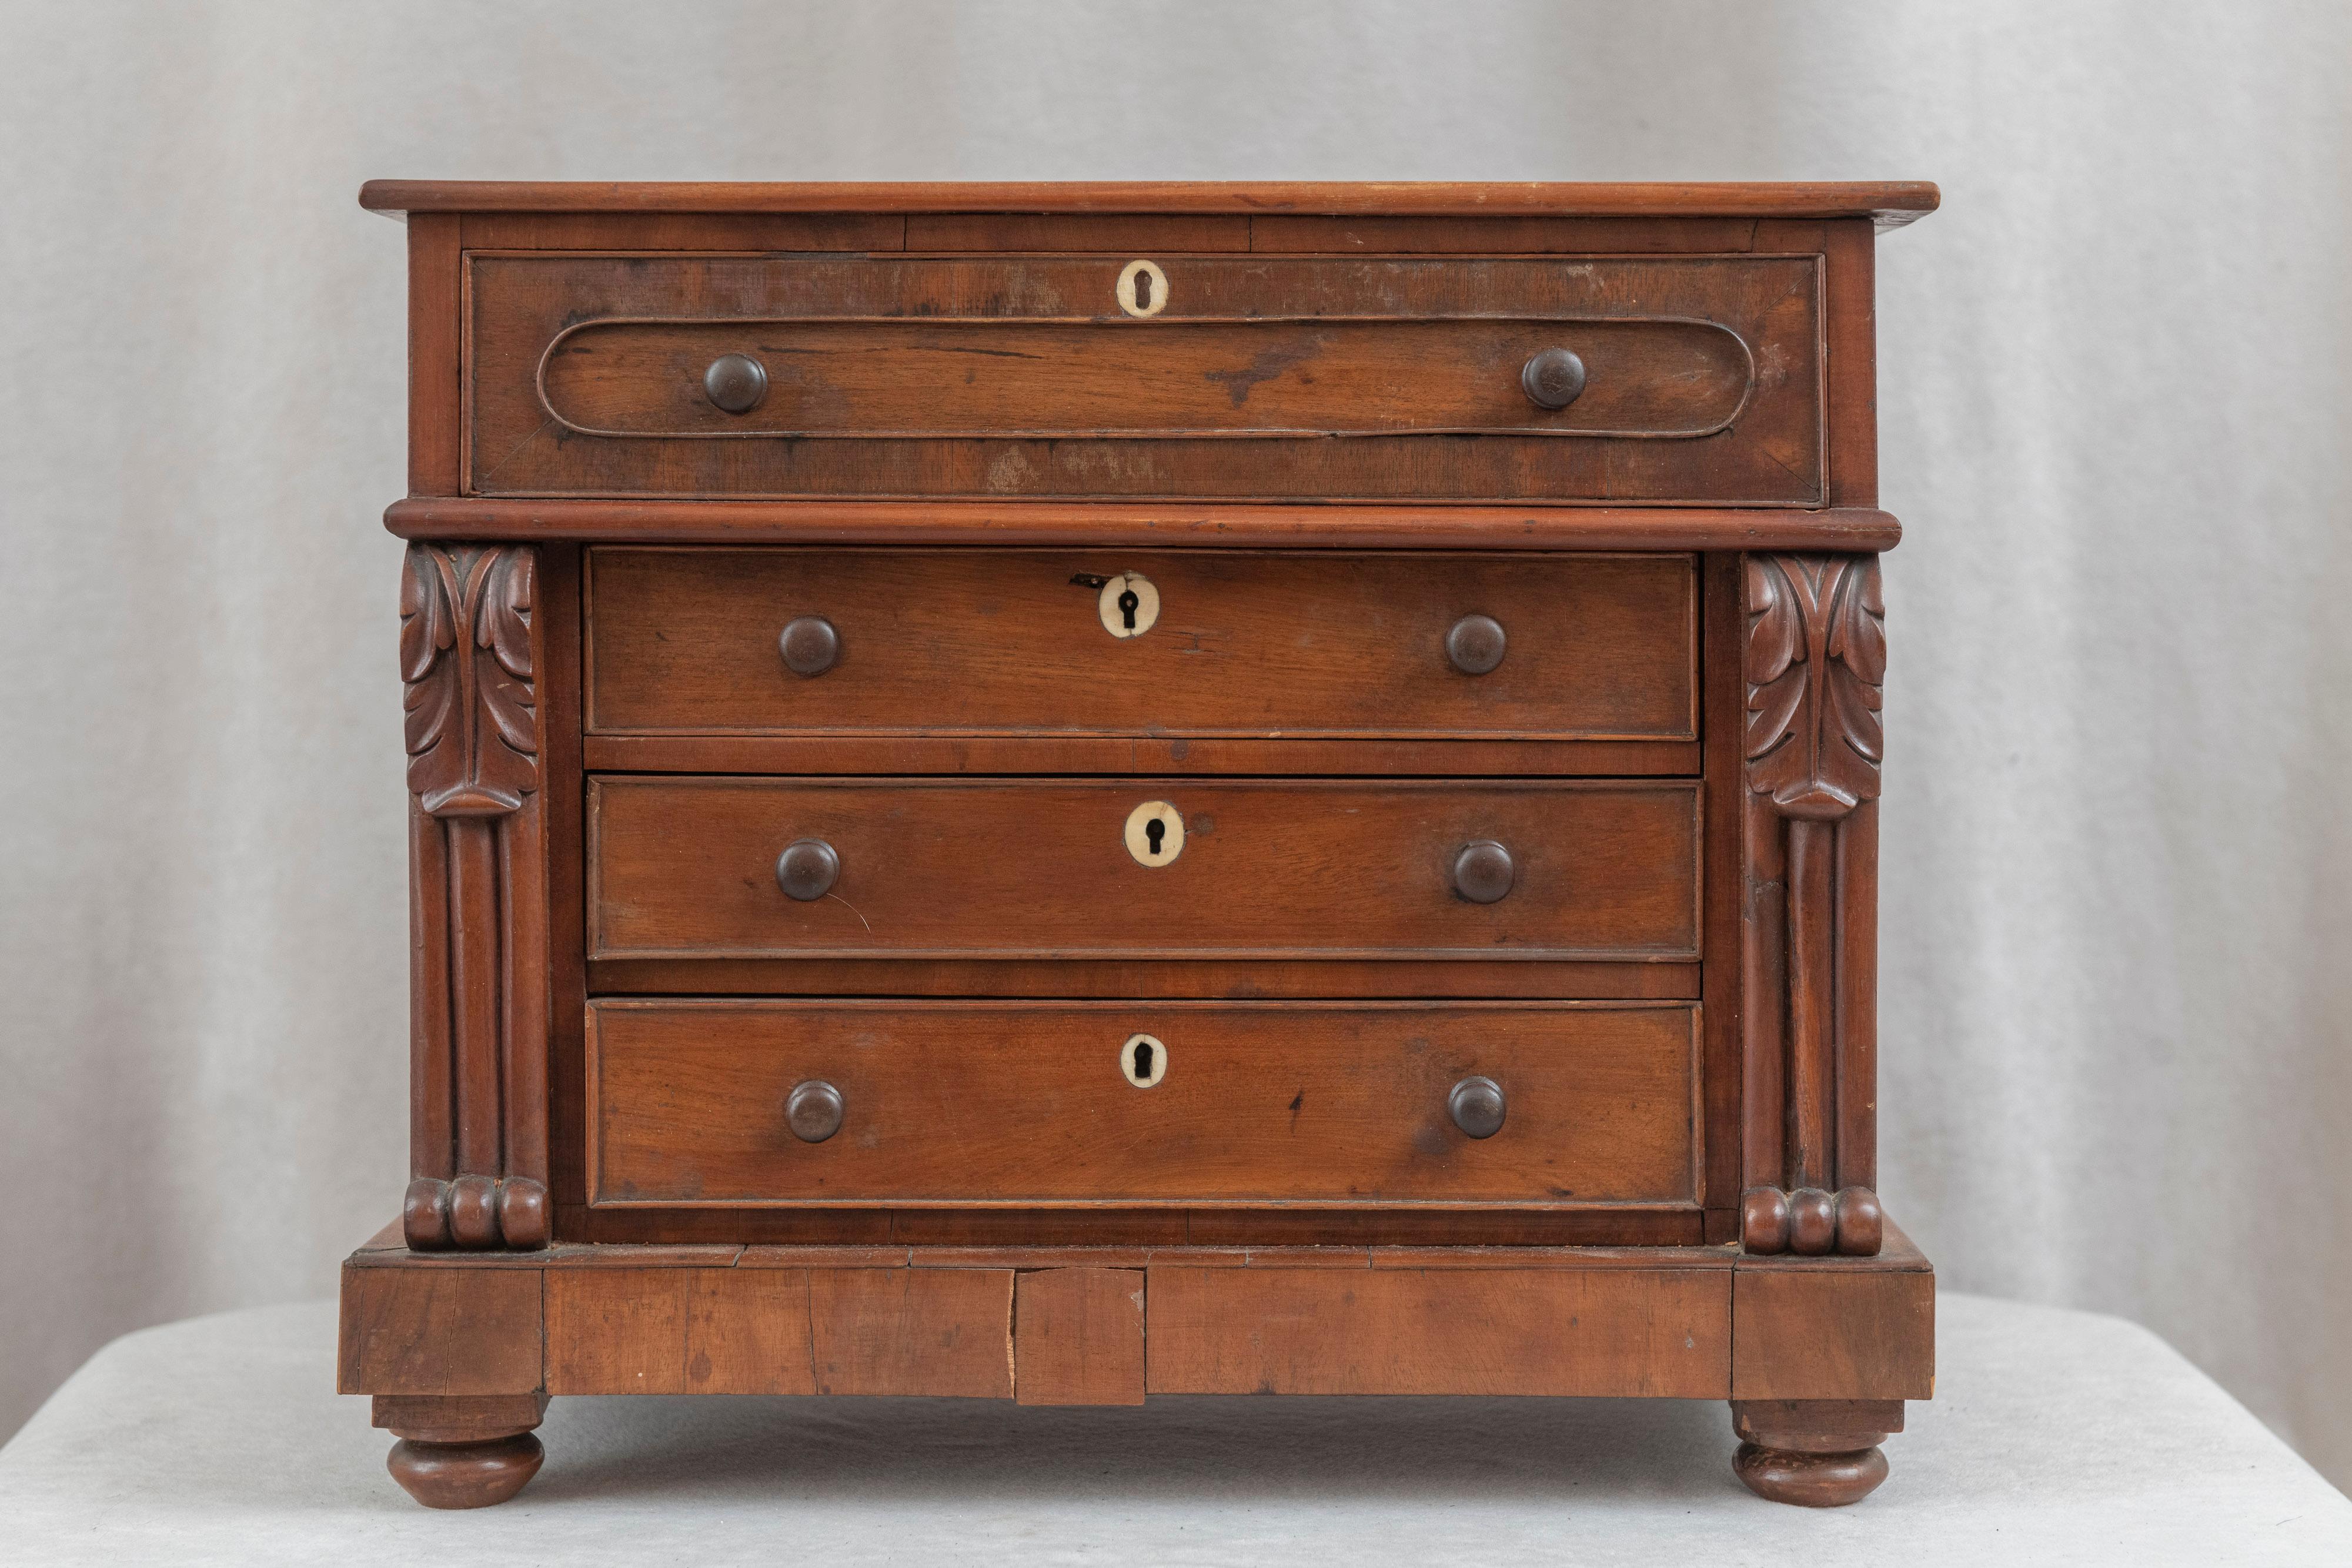  This lovely little mahogany dresser can solve much of one's needs without taking up a lot of space. Hand carved with the original wooden knobs and as an added bonus, bone keyhole escutcheons. Well made, rich in color, nicely finished, and that